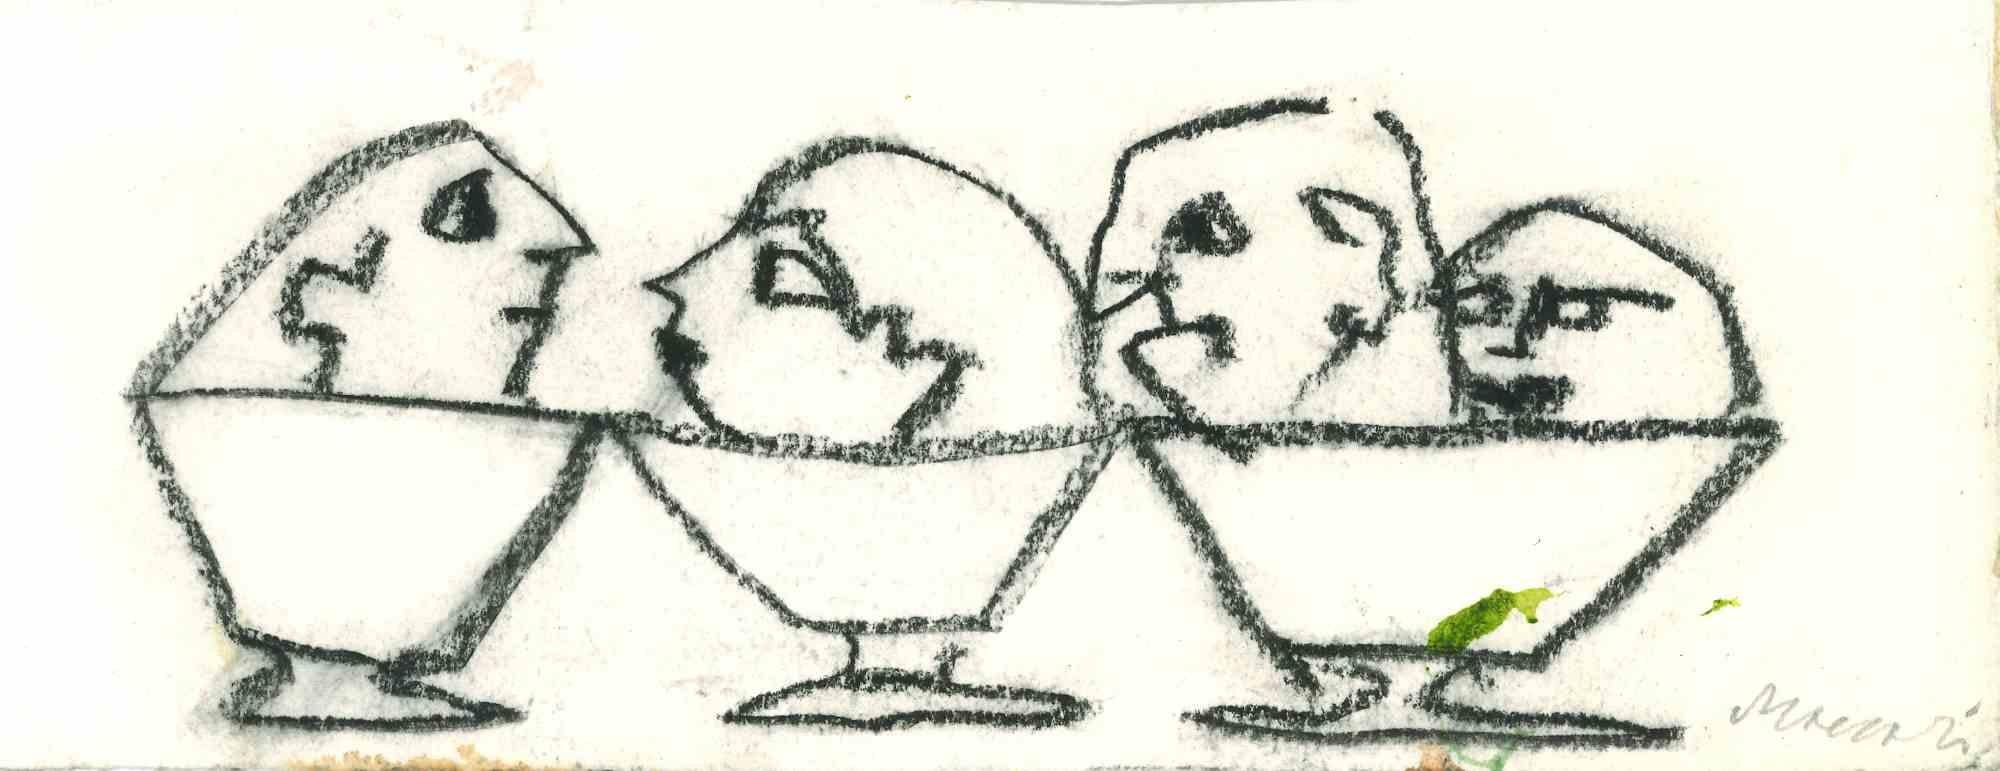 Cups/Couples is a  charcoal Drawing realized by Mino Maccari  (1924-1989) in the Mid-20th Century.

Hand-signed on the lower.

Good conditions.

Mino Maccari (Siena, 1924-Rome, June 16, 1989) was an Italian writer, painter, engraver and journalist,